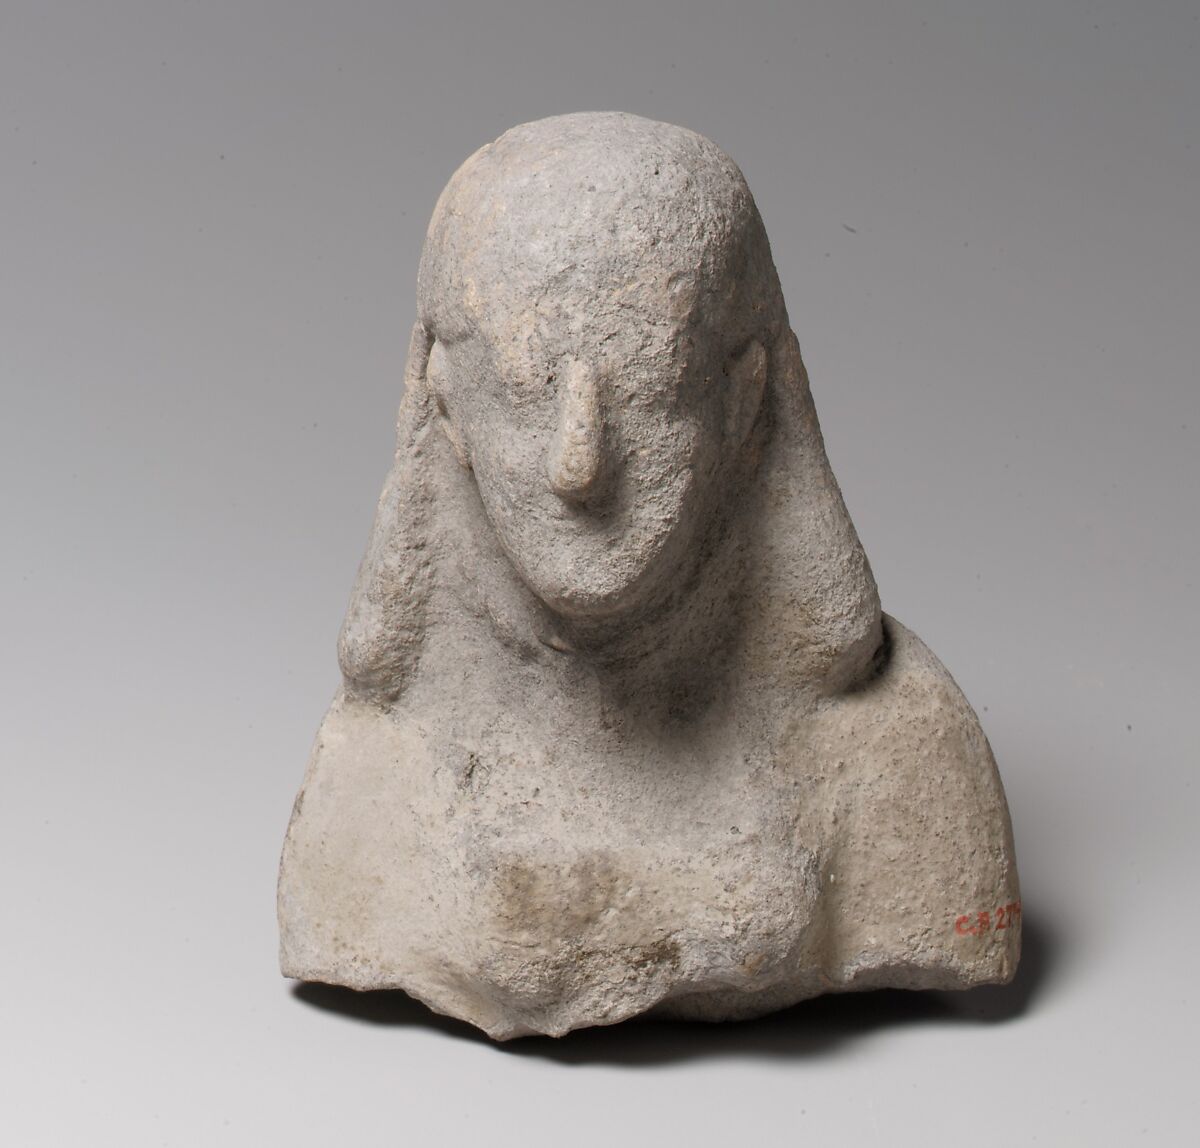 Head and upper body of a female figurine, Terracotta, Cypriot 